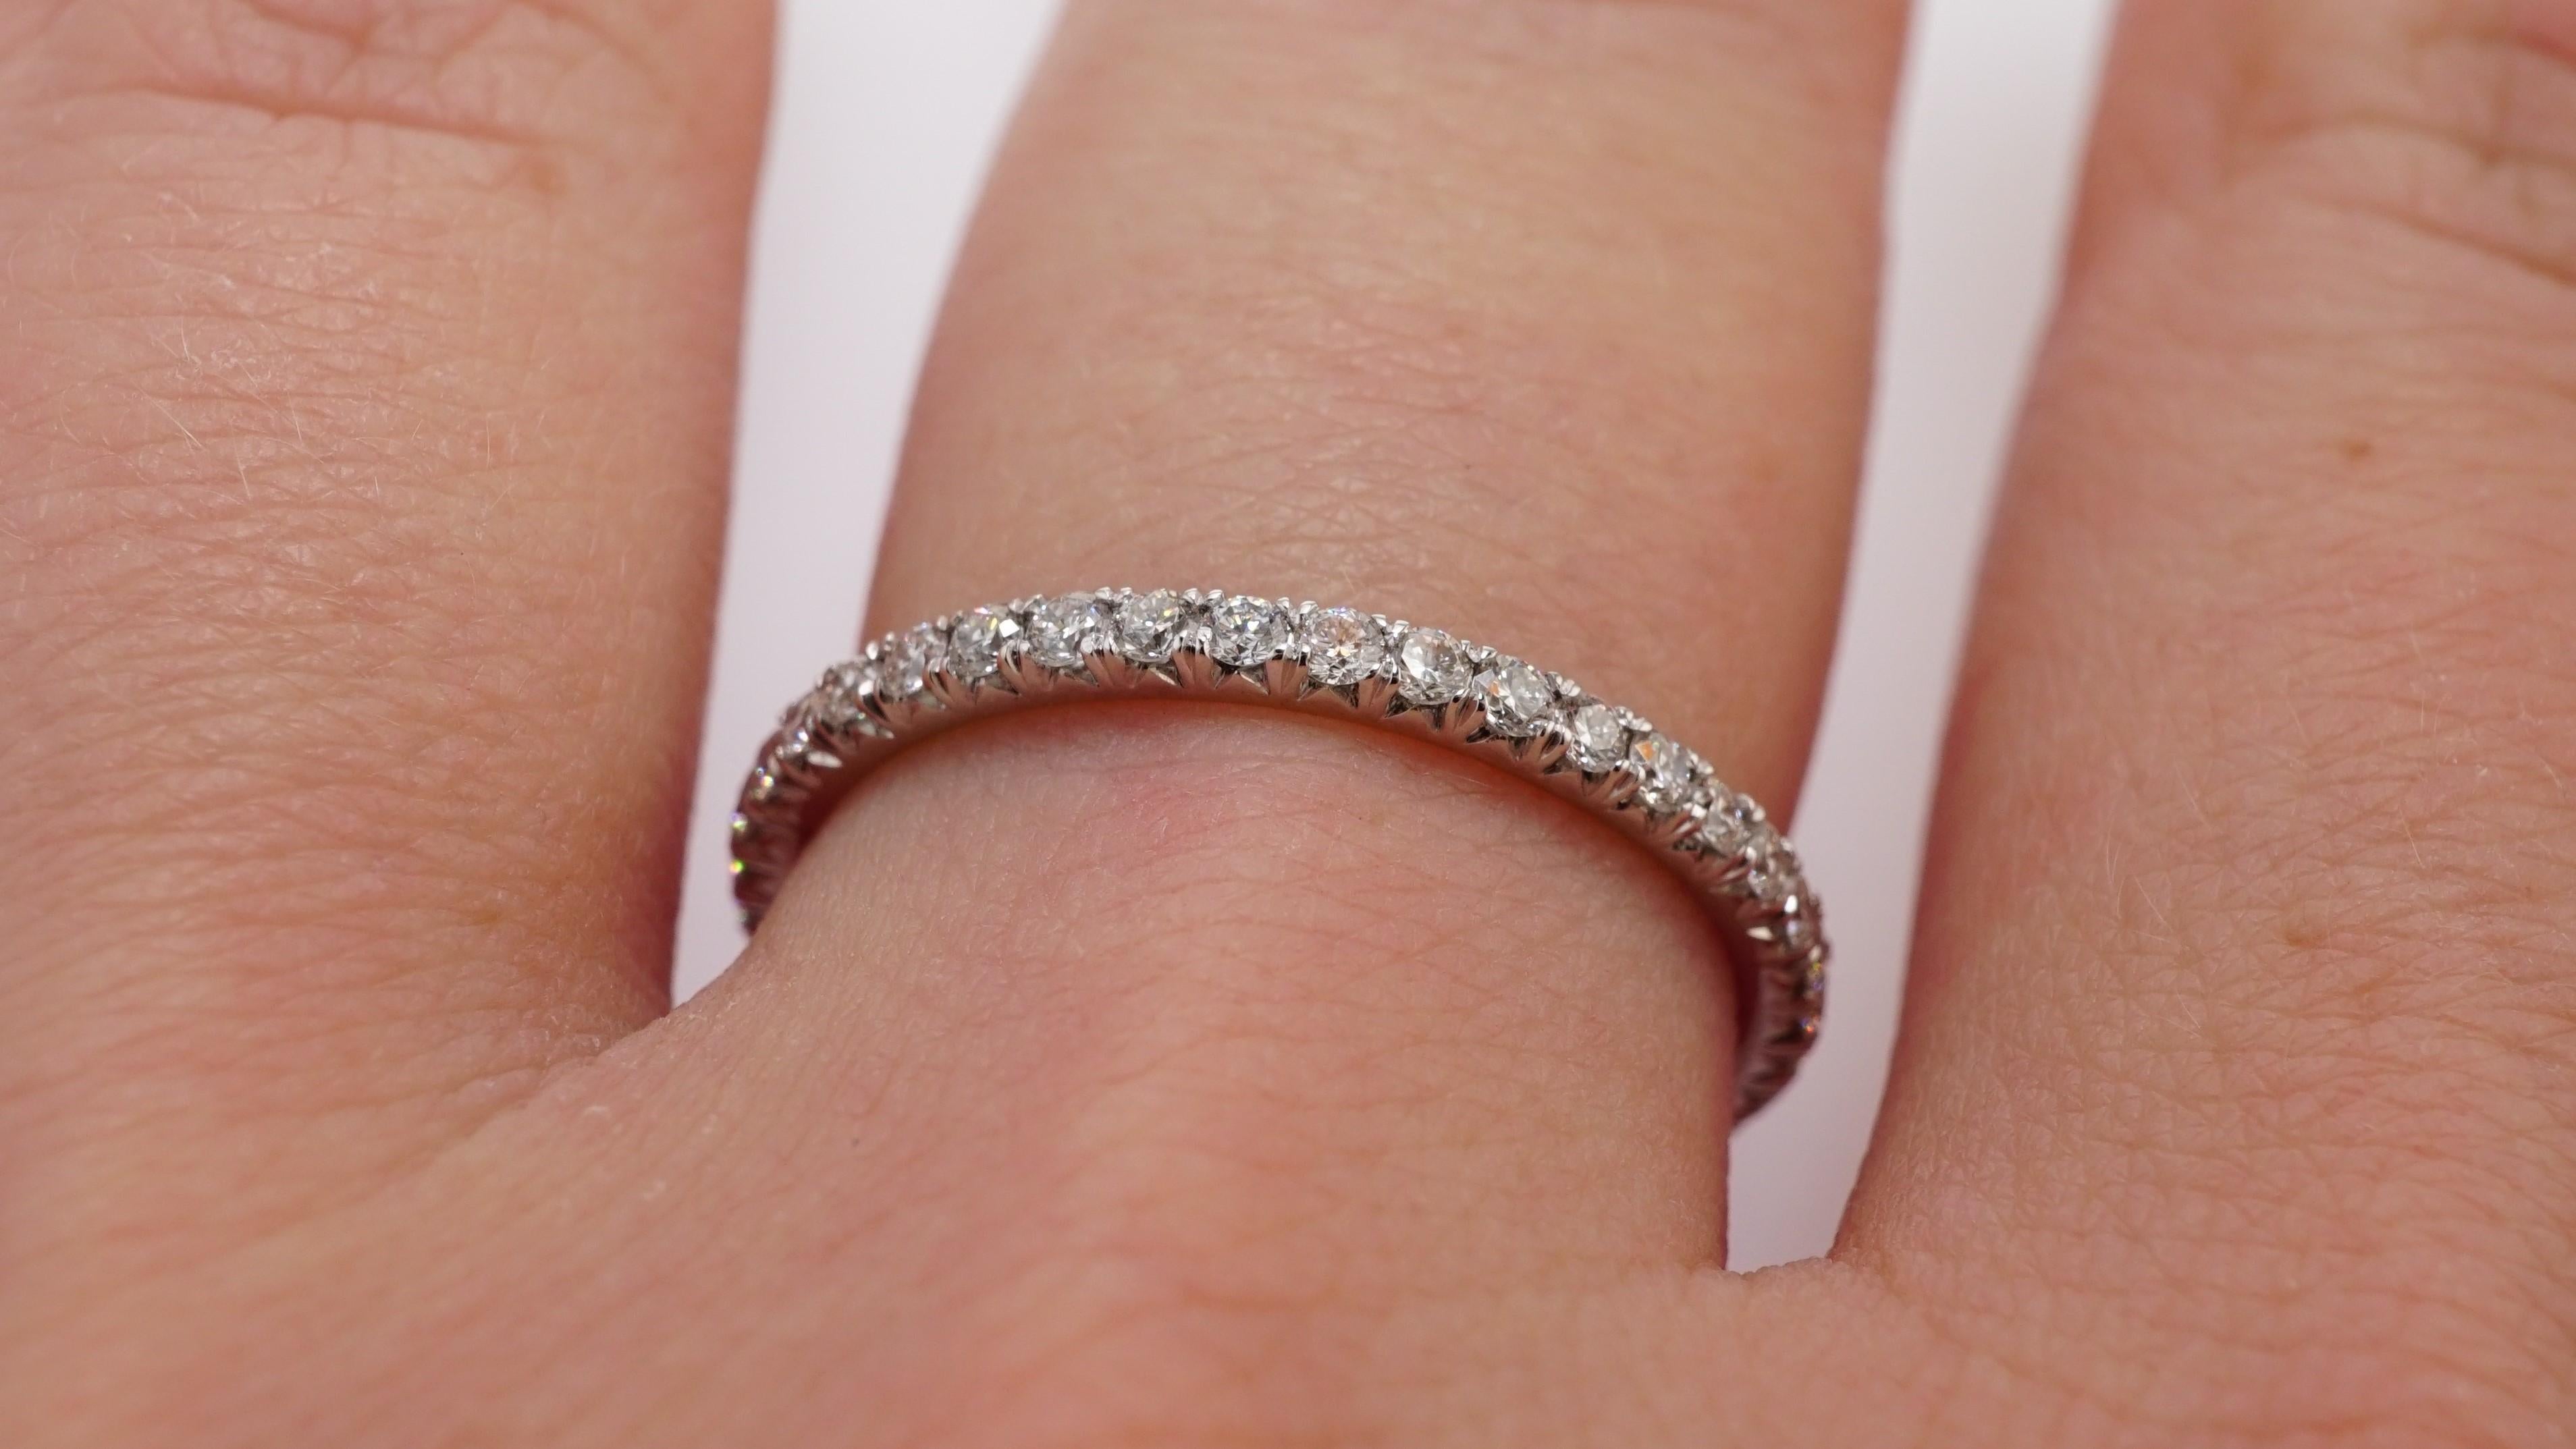 Diamond Eternity Wedding Band set in Platinum. Pave set brilliant round diamonds are F-G VS2. Carat weight = .50 ct. Total ring weight 1.90 grams. 
Ring size 5.75. Can be sized upon request. This ring is customizable, price may vary depending on